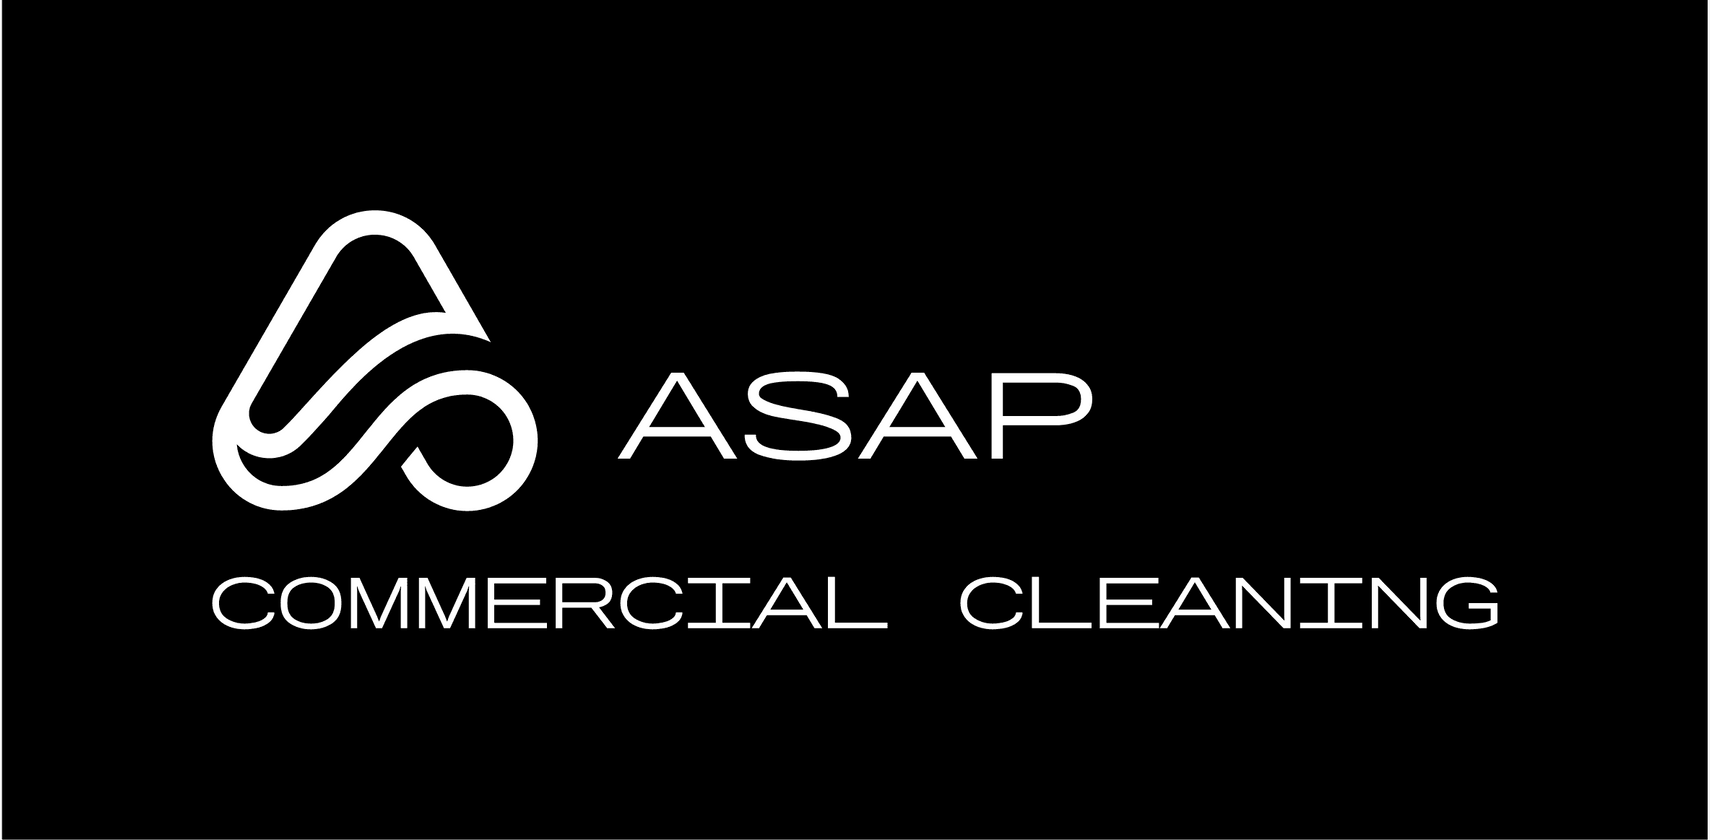 ASAP Commercial Cleaning featured image